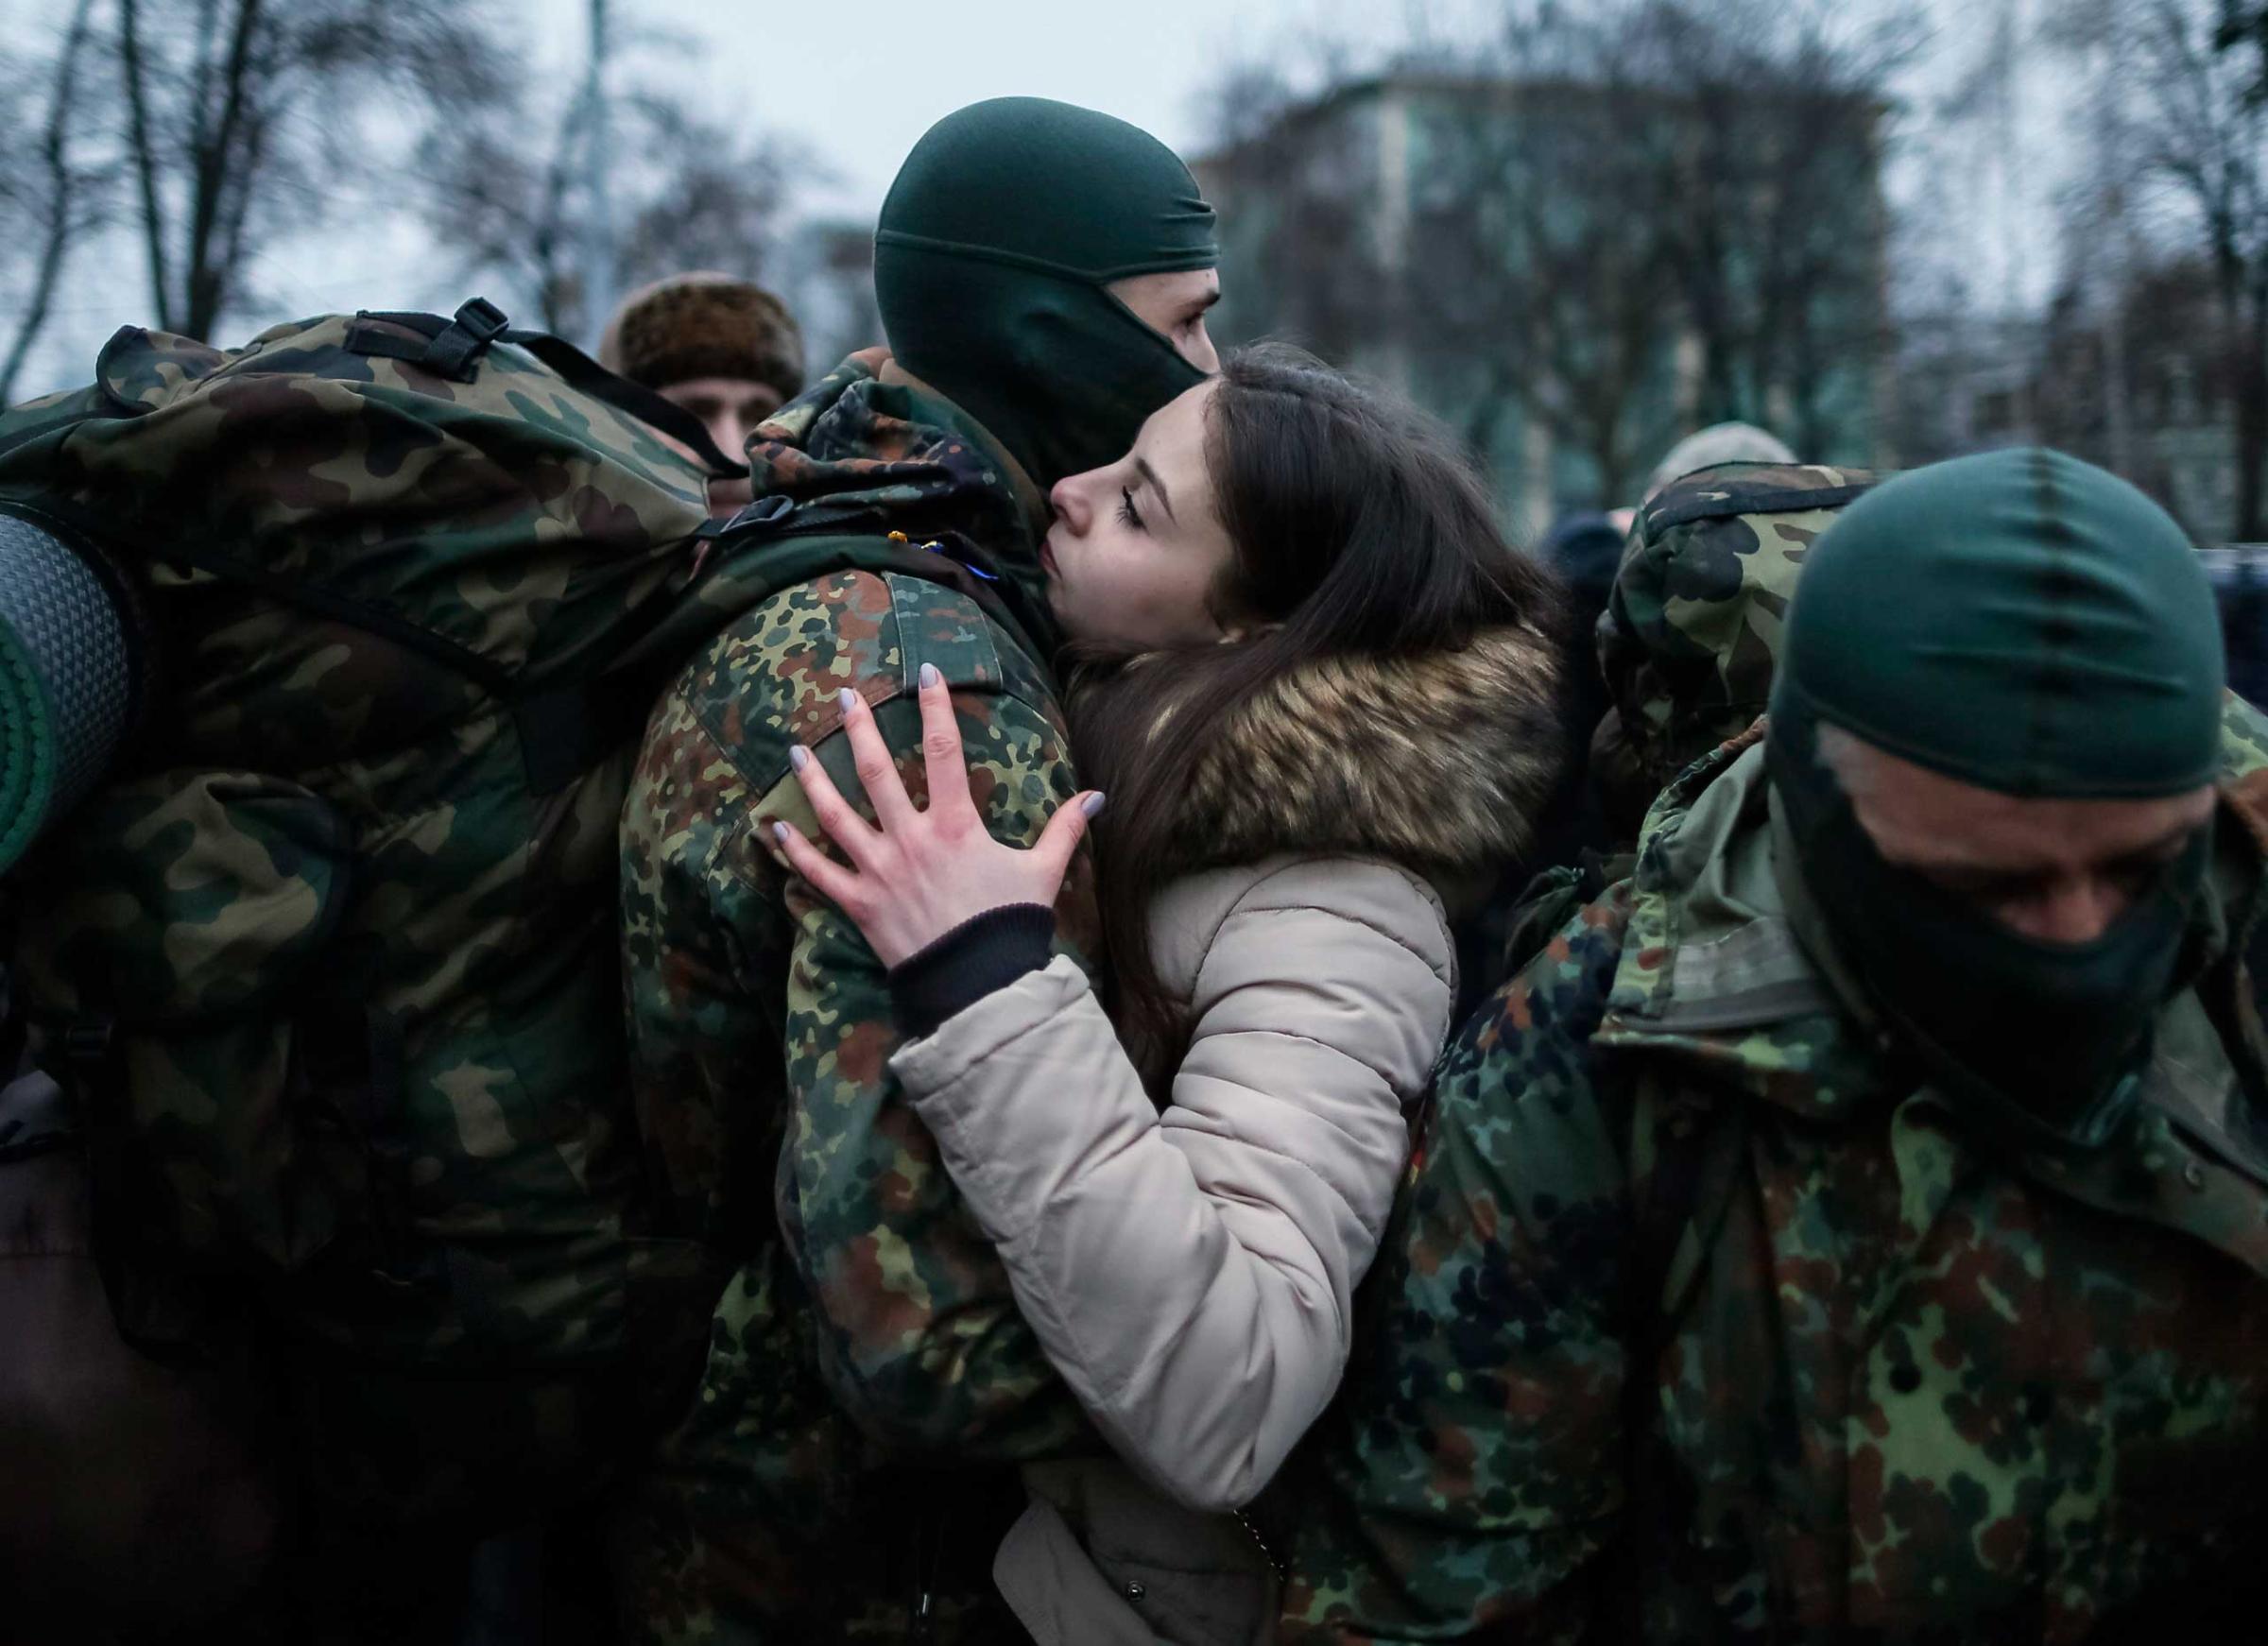 A new volunteer for the Ukrainian Interior Ministry's Azov battalion embraces his girlfriend before departing to the frontlines in eastern Ukraine, in central Kiev